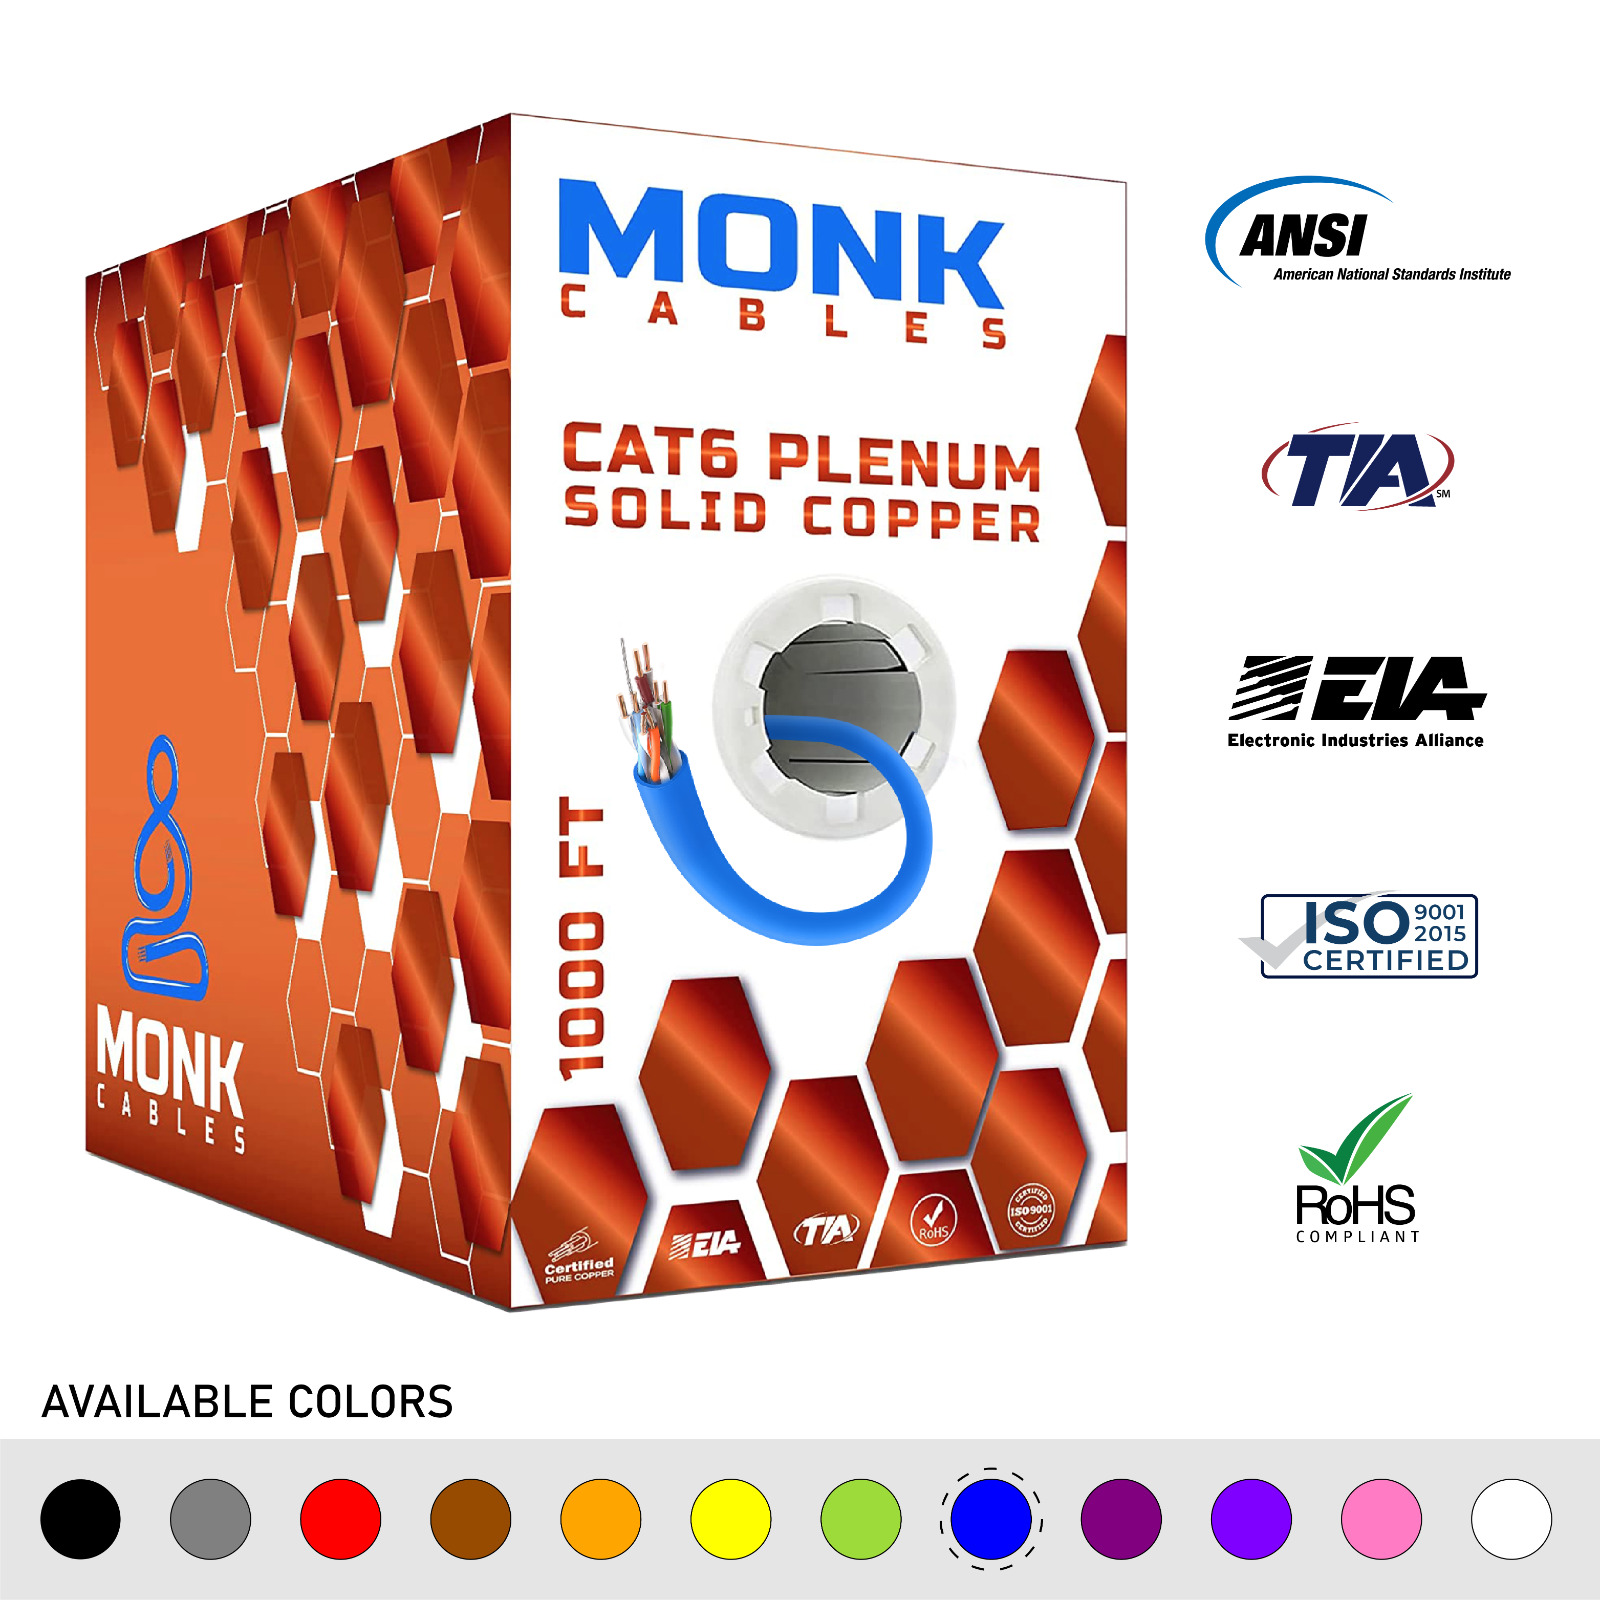 MonkCables Cat6 Plenum Solid Bare Copper 1000ft 550MHz 23AWG Cable in 10 Colors